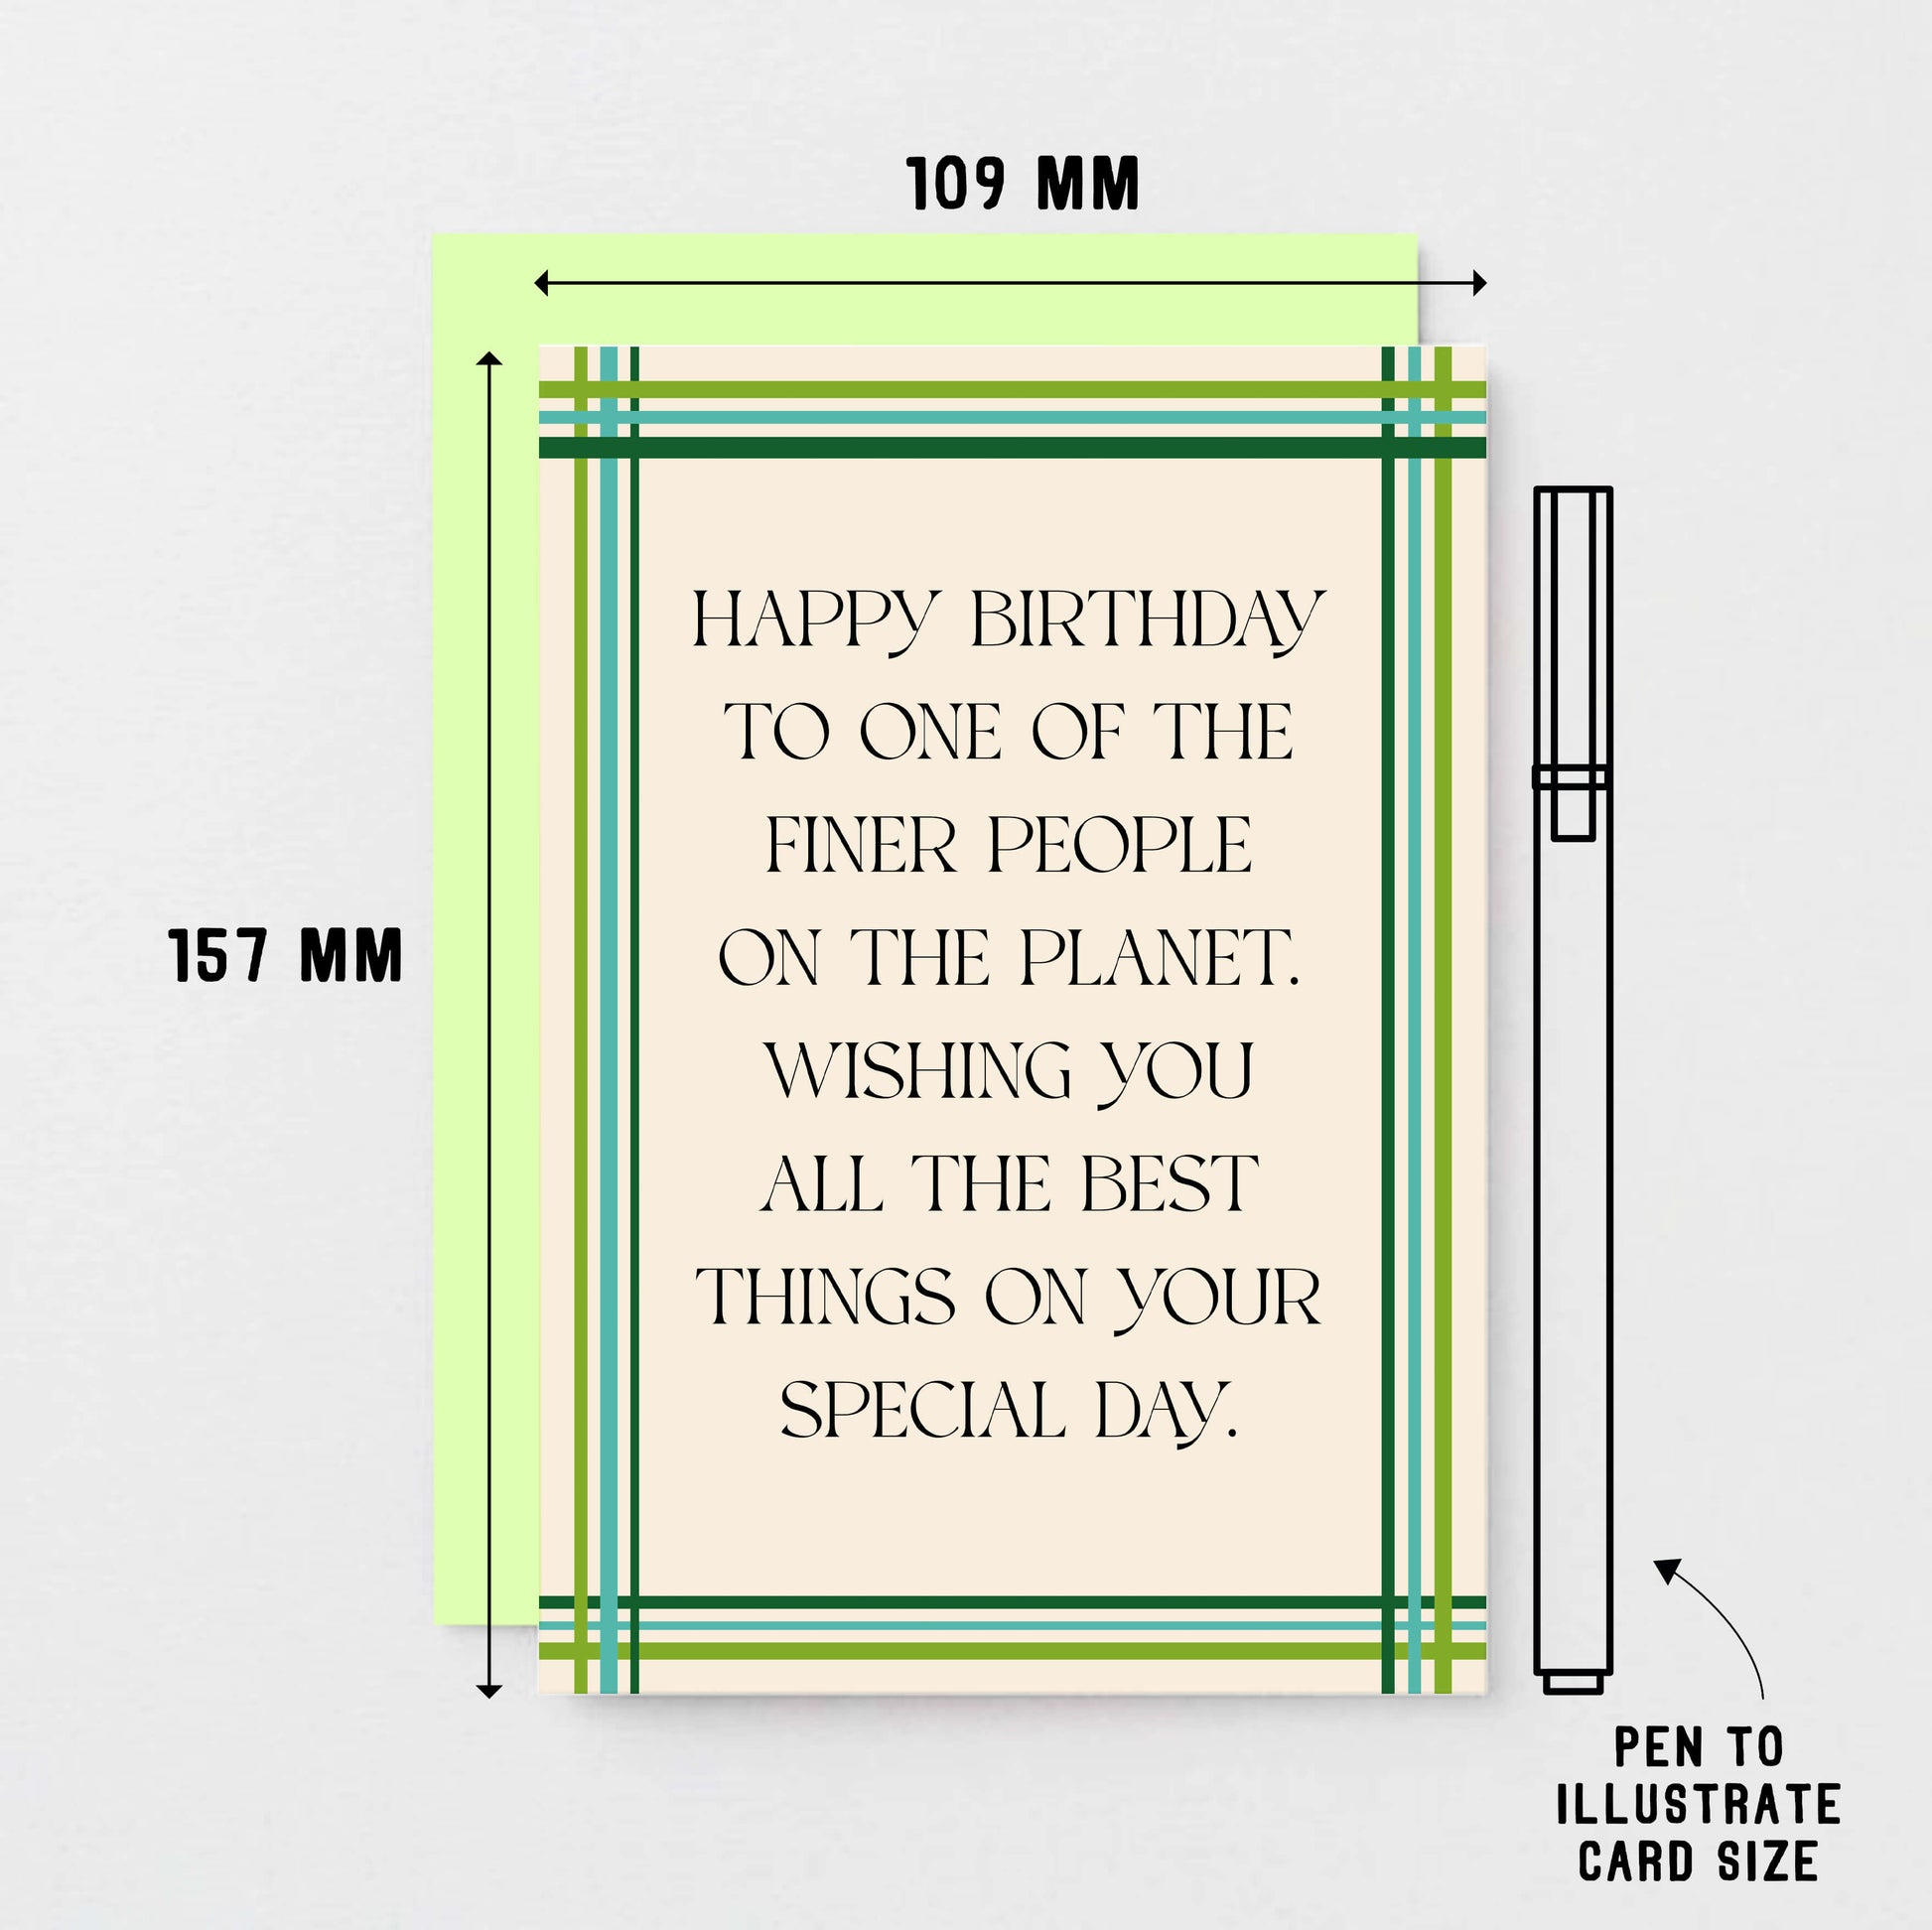 Birthday Card by SixElevenCreations. Reads Happy birthday to one of the finer people on the planet. Wishing you all the best things on your special day. Product Code SE0901A6